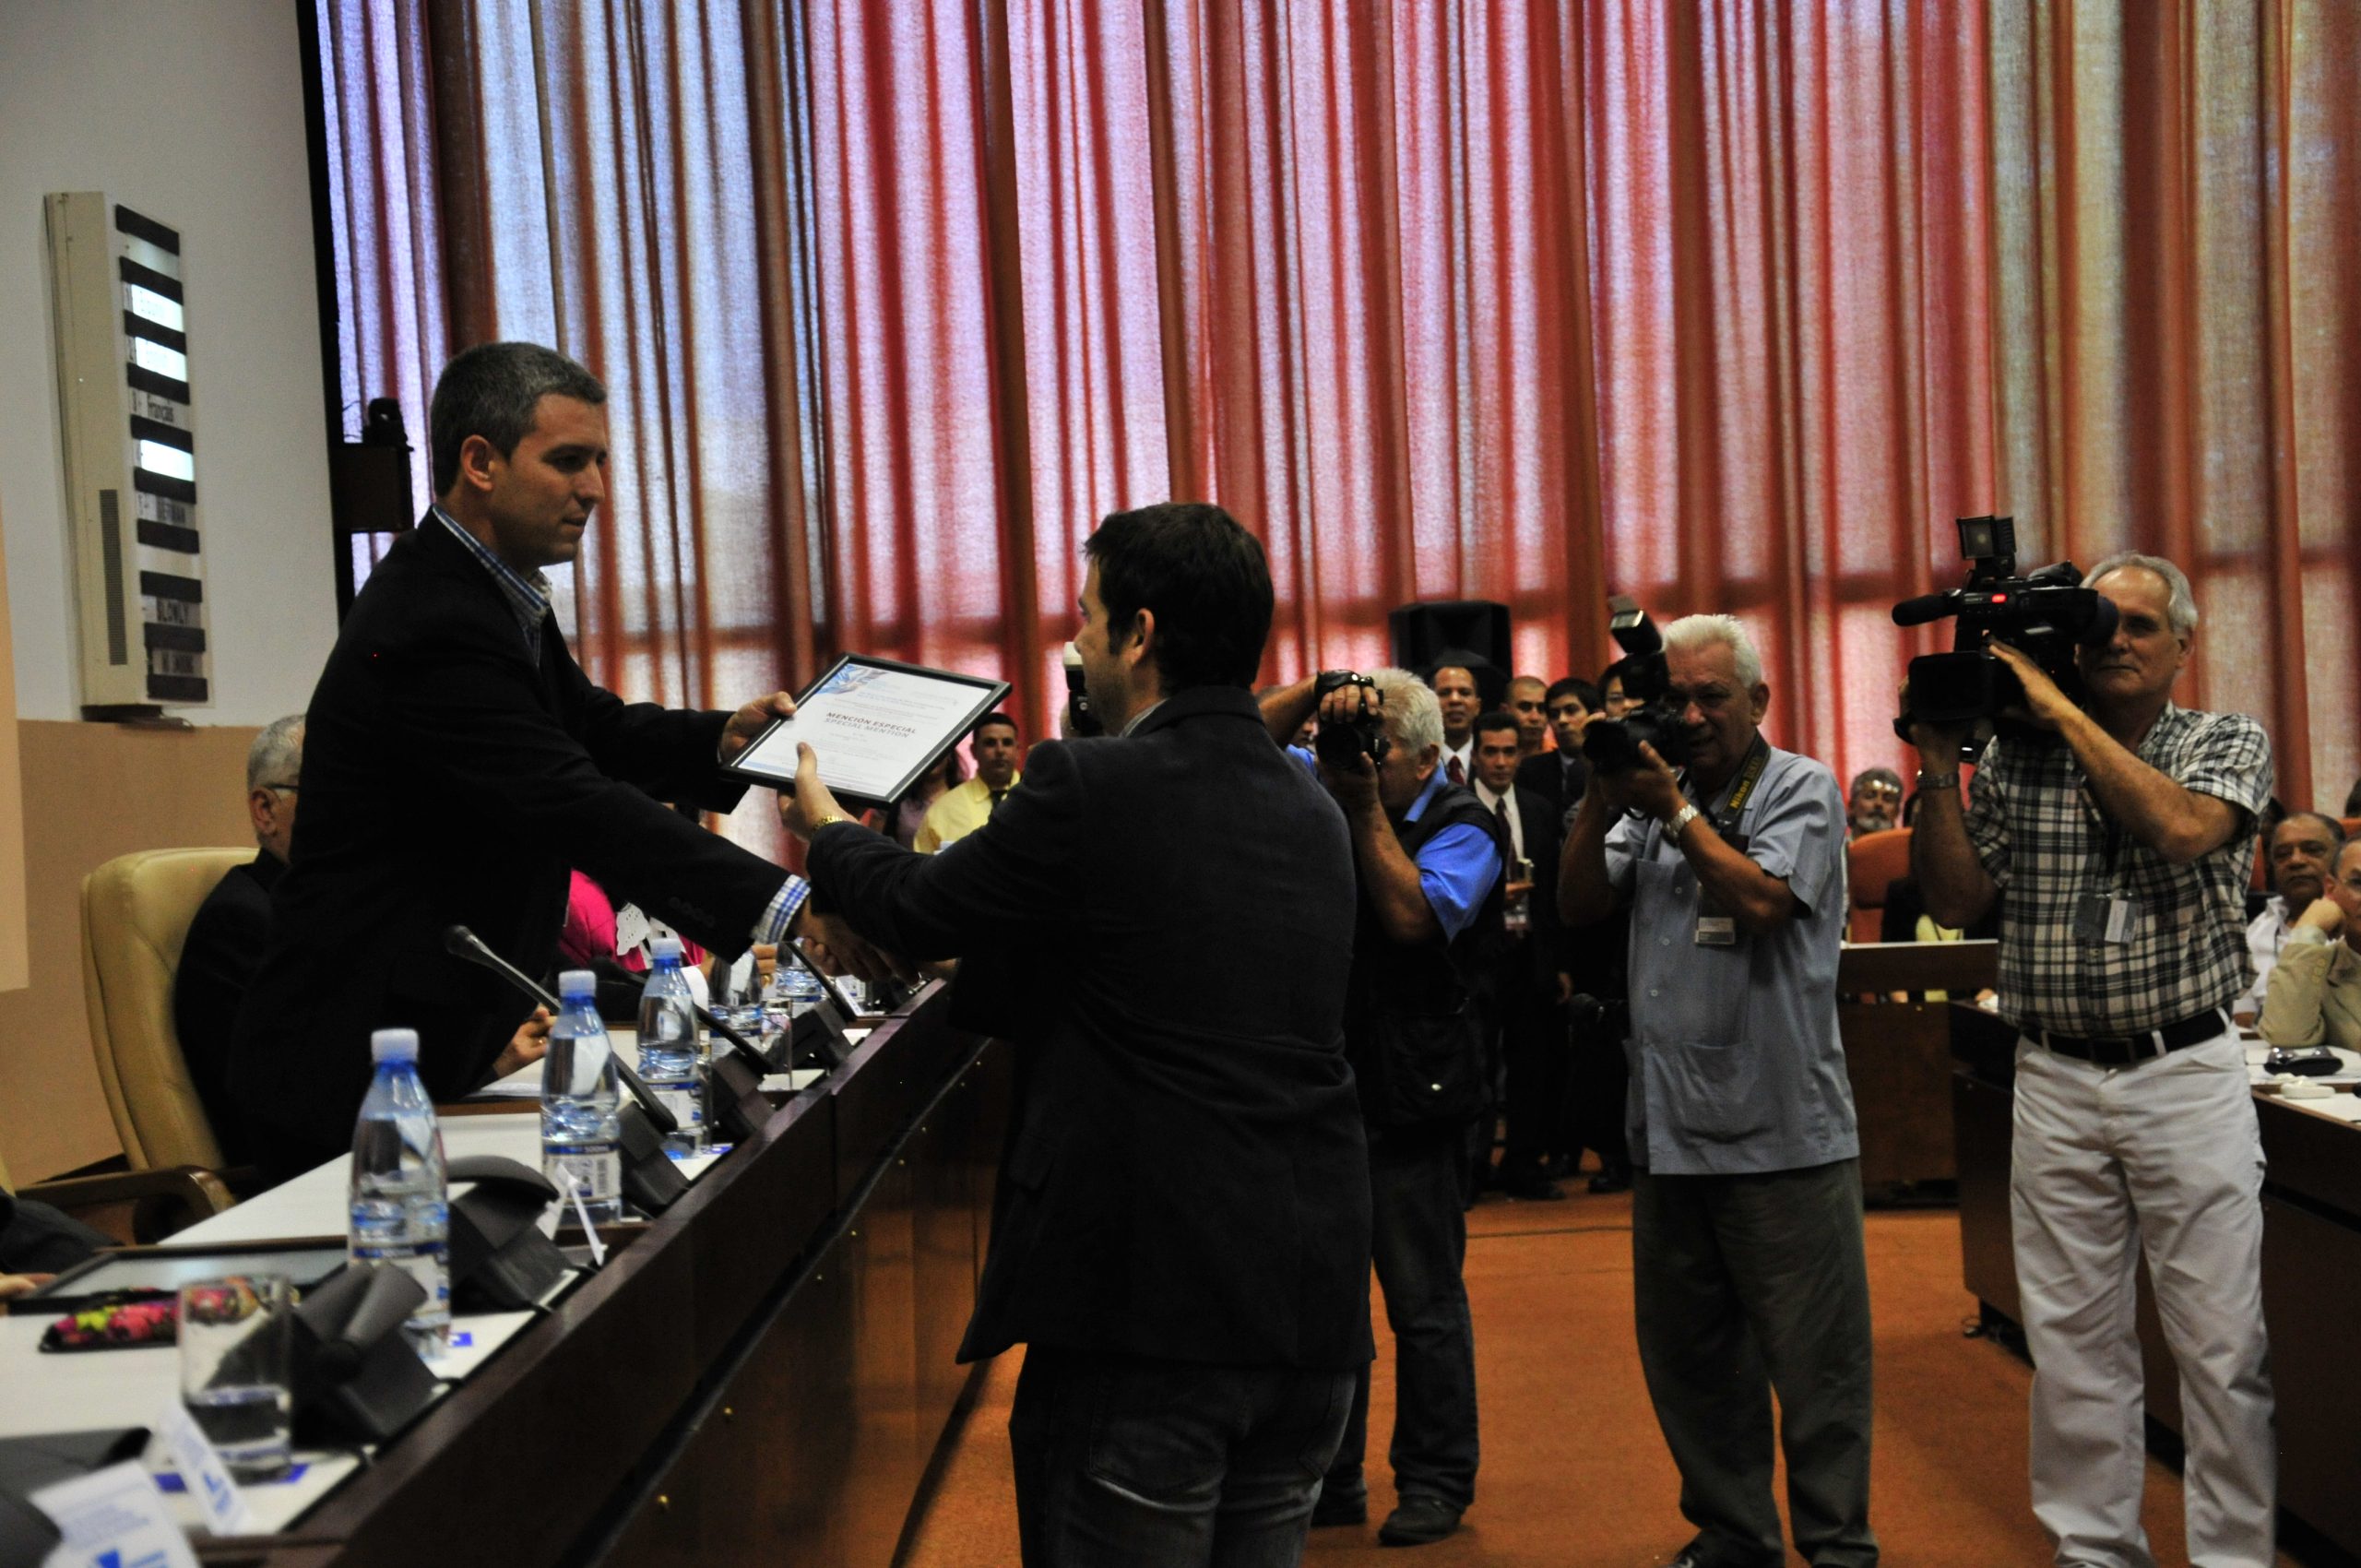 2013 Award ceremony with the President of the Organizing Committee, current Vice Prime Minister of Cuba.